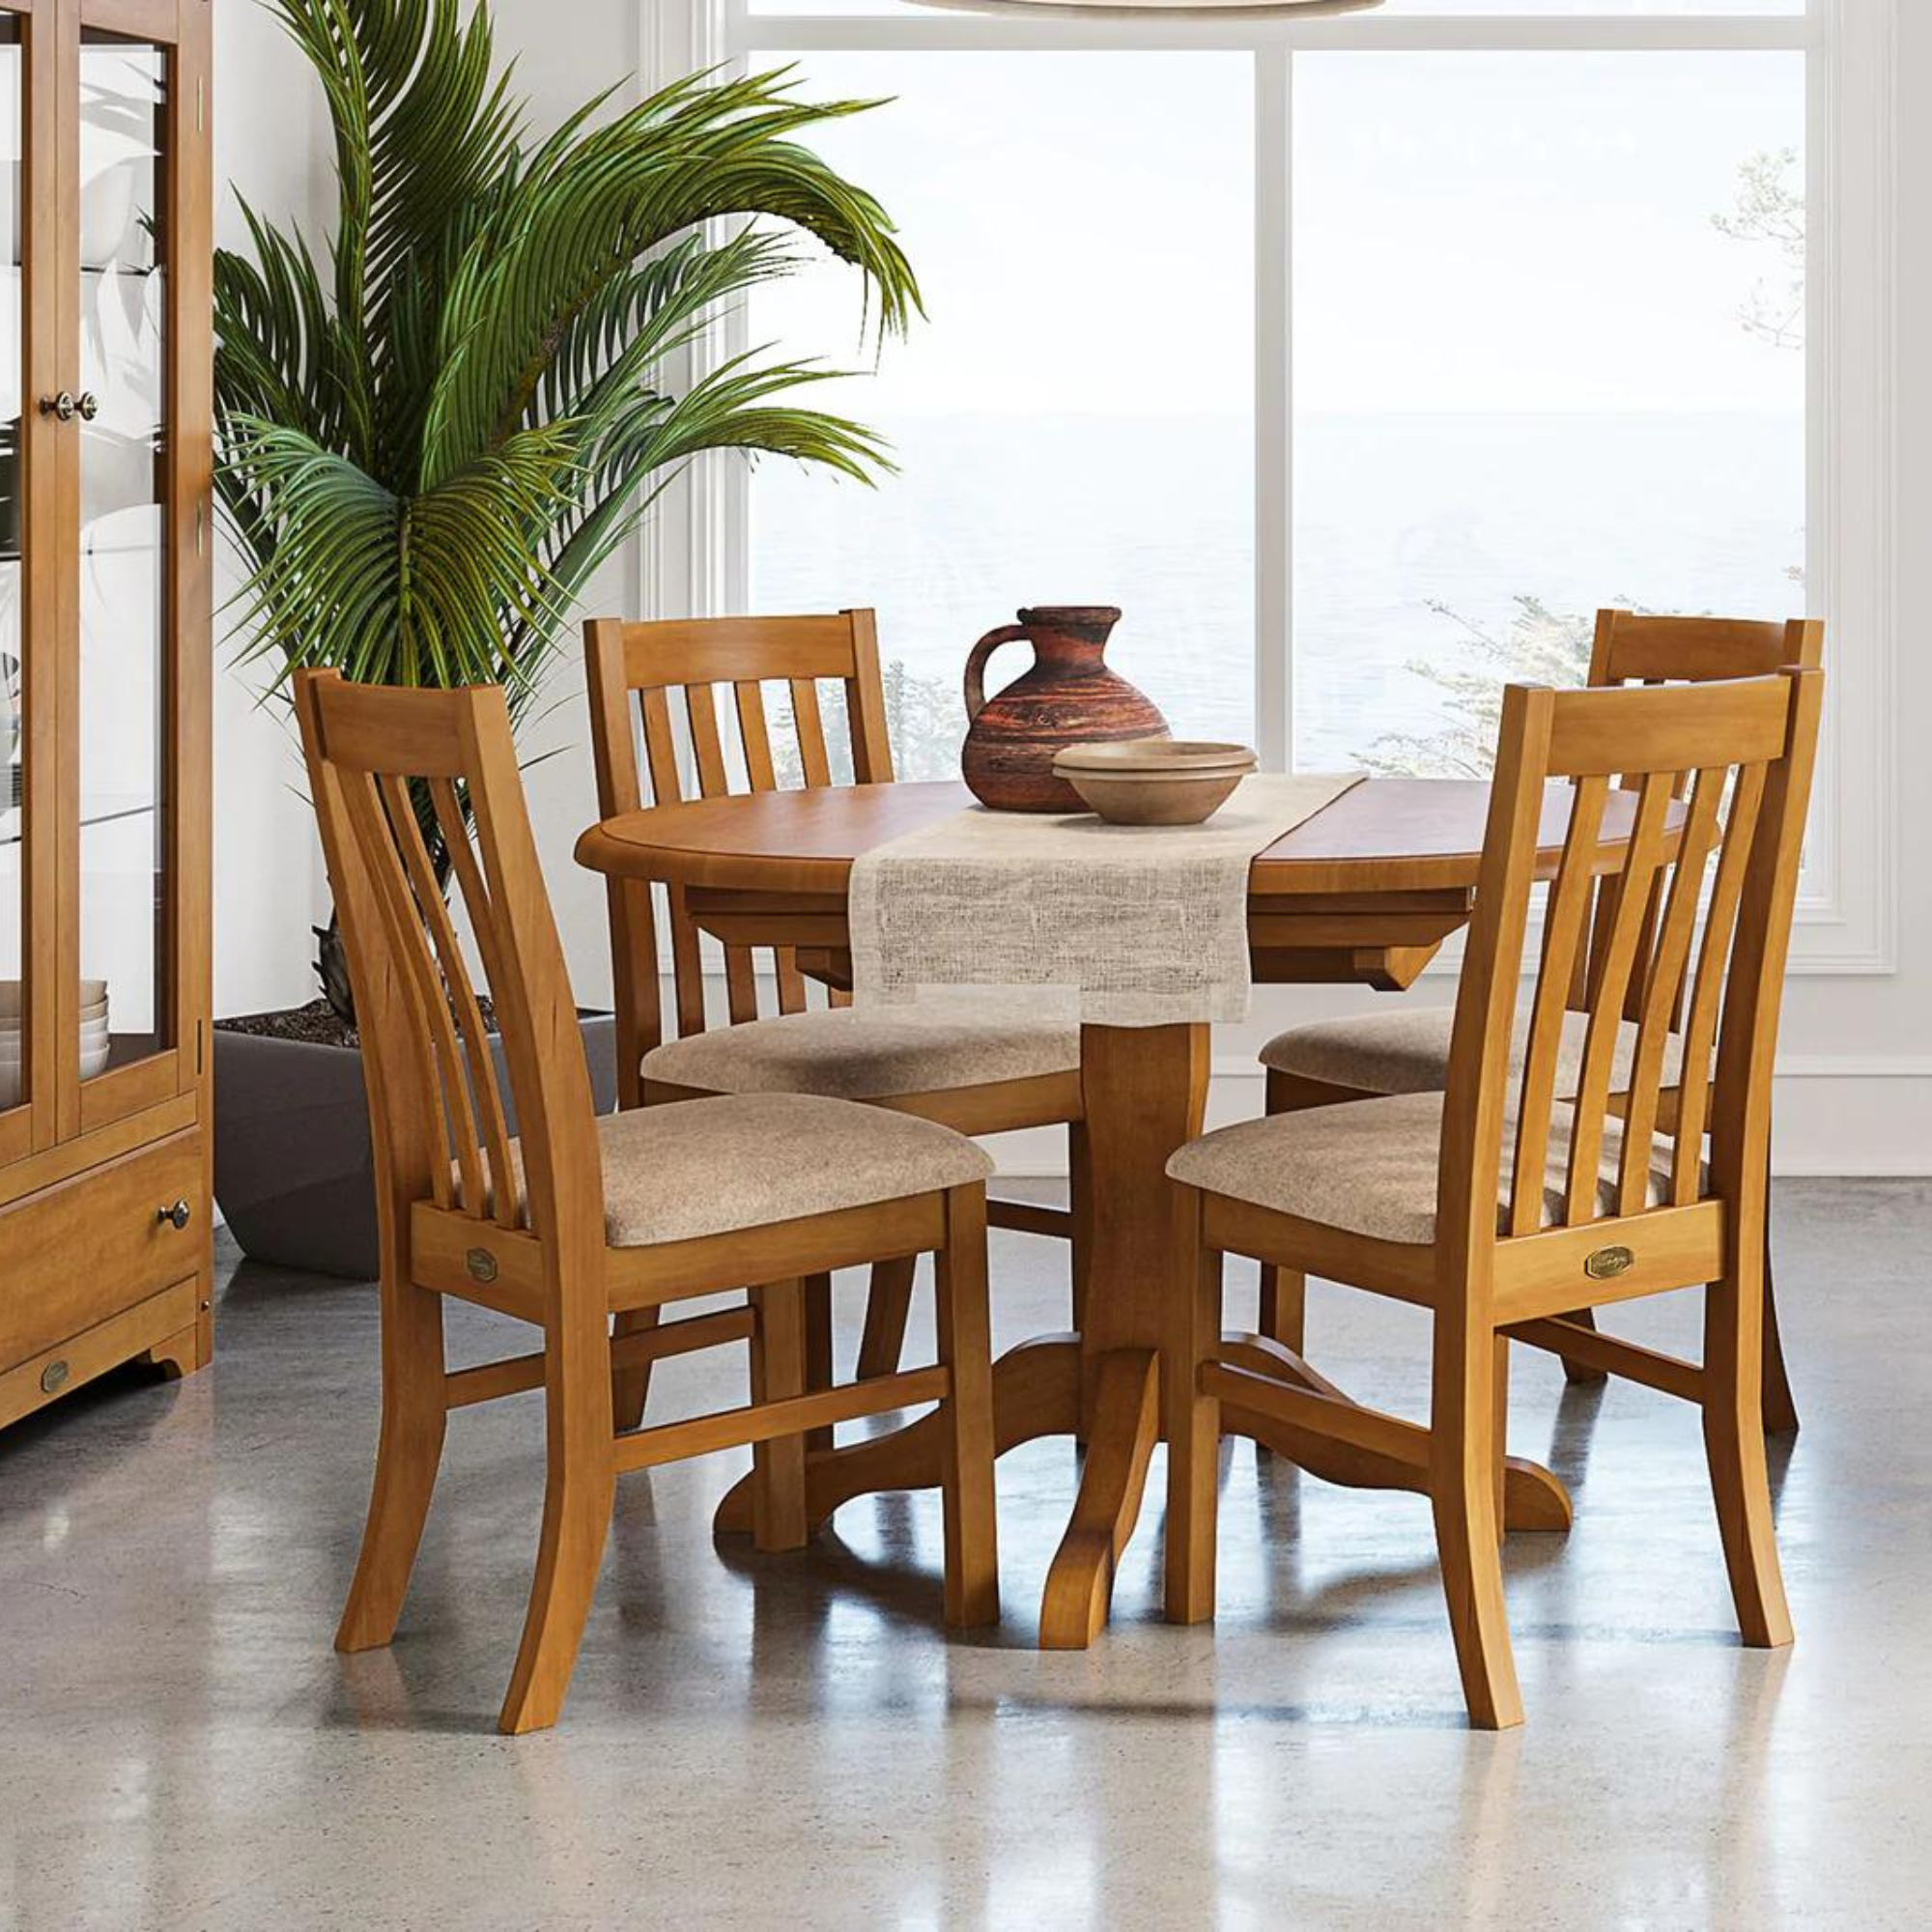 VILLAGER 1050 ROUND DINING TABLE | NZ MADE